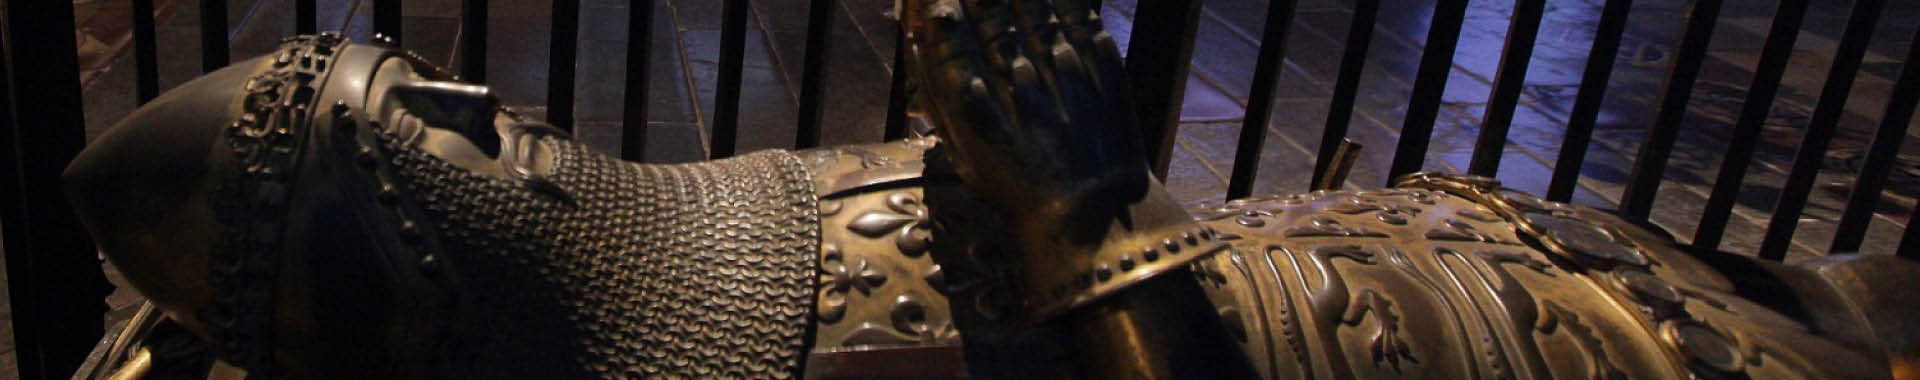 Image of the Black Prince in Canterbury Cathedral